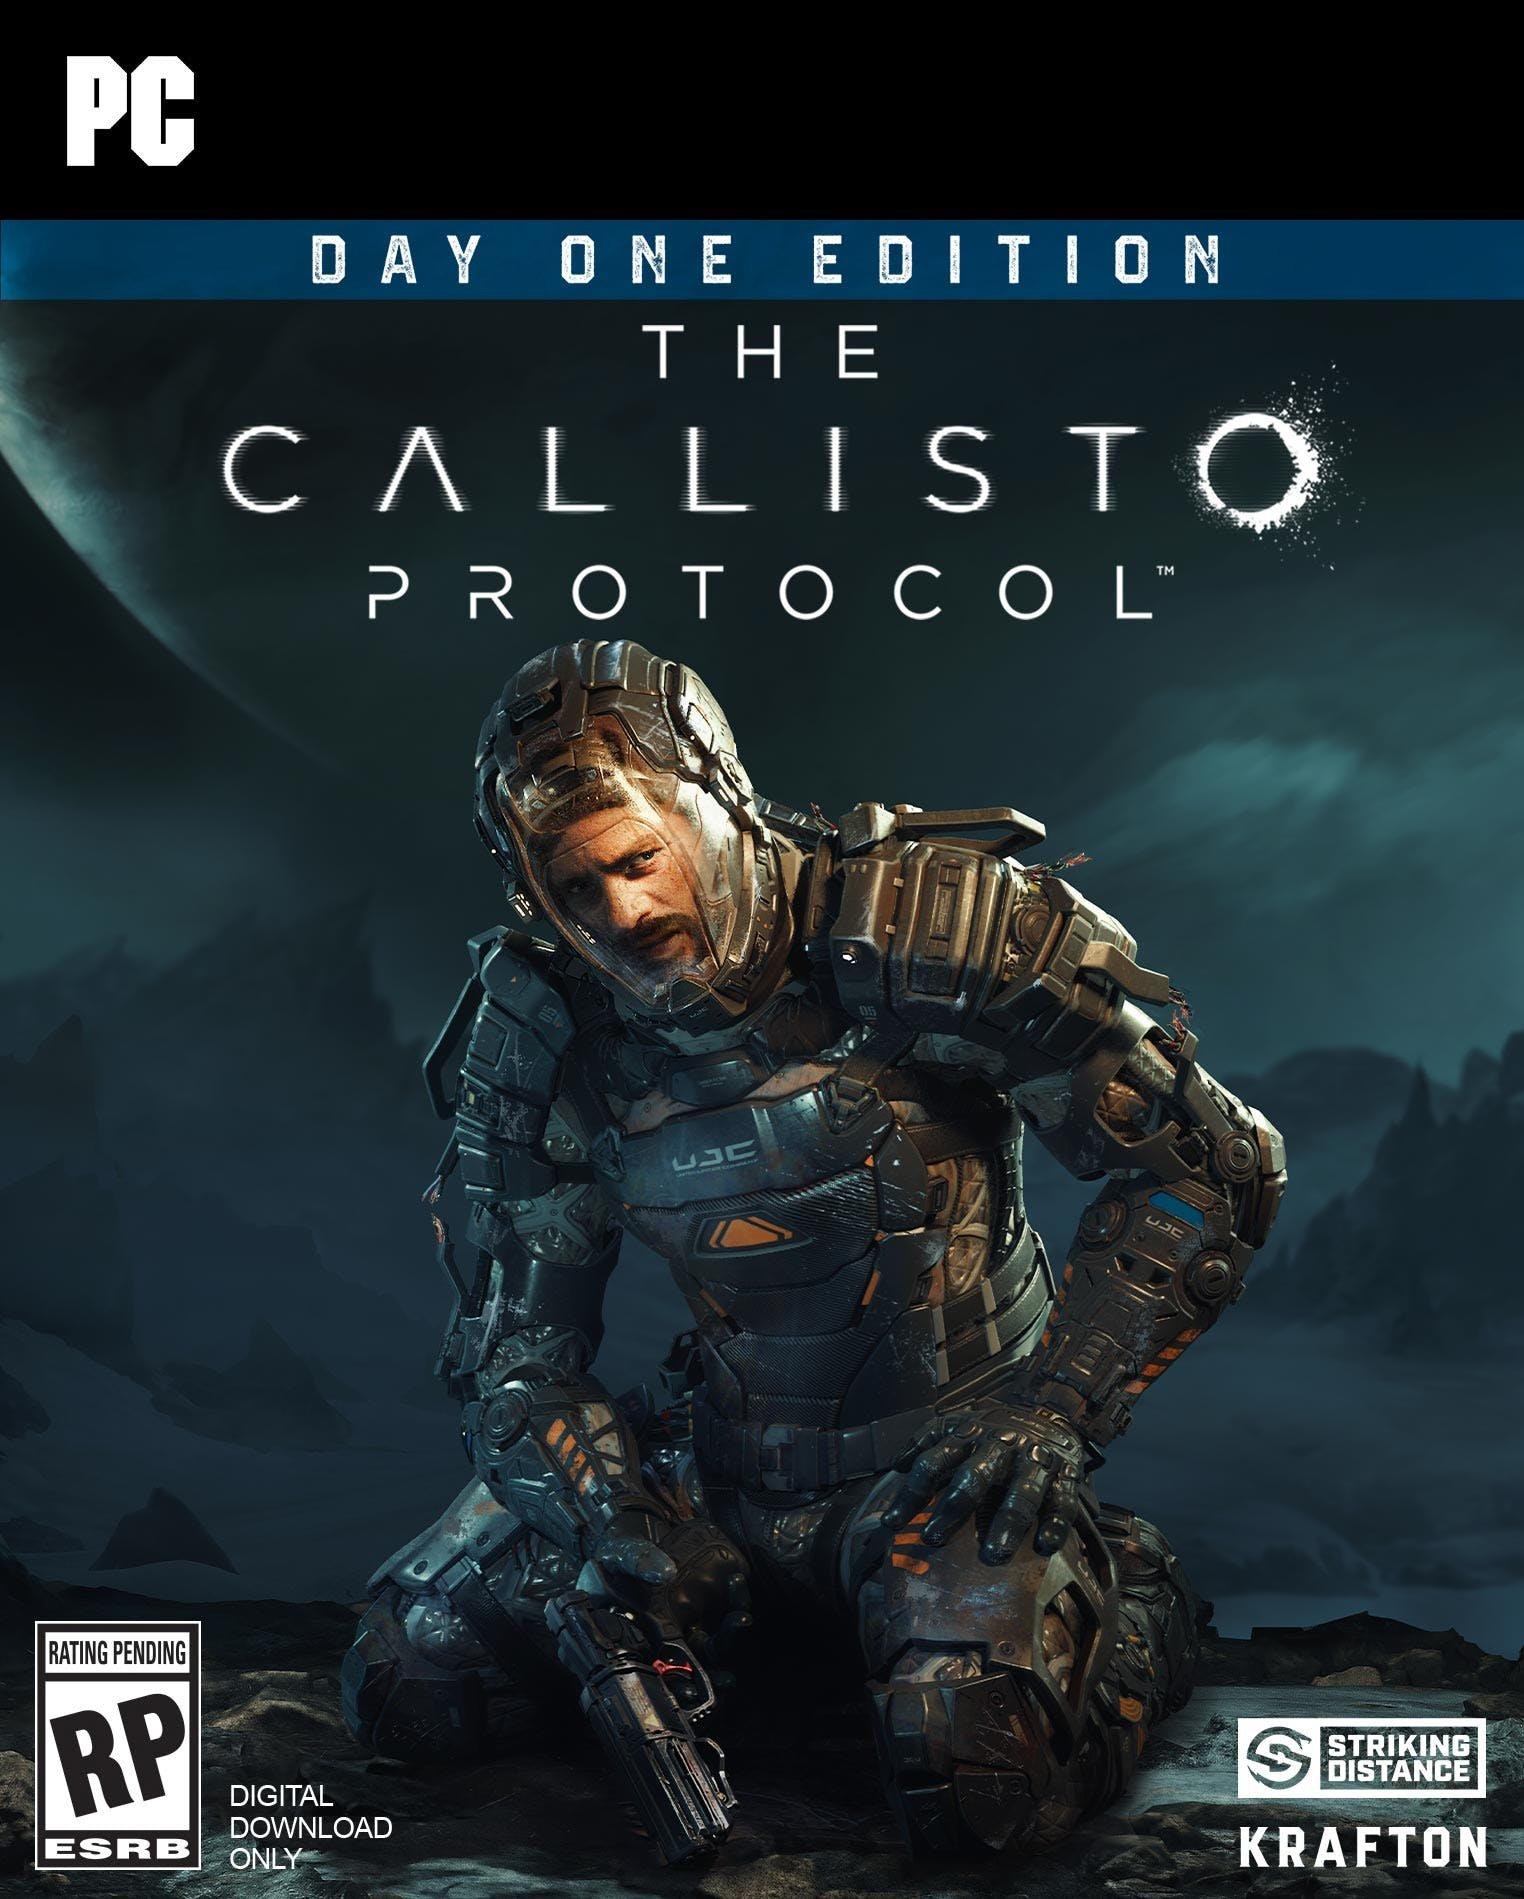 metacritic on X: The Callisto Protocol [PS5 - 76]   The Callisto Protocol gave me nightmares. It's the best horror game of the  year, and a bright new contender in the survival